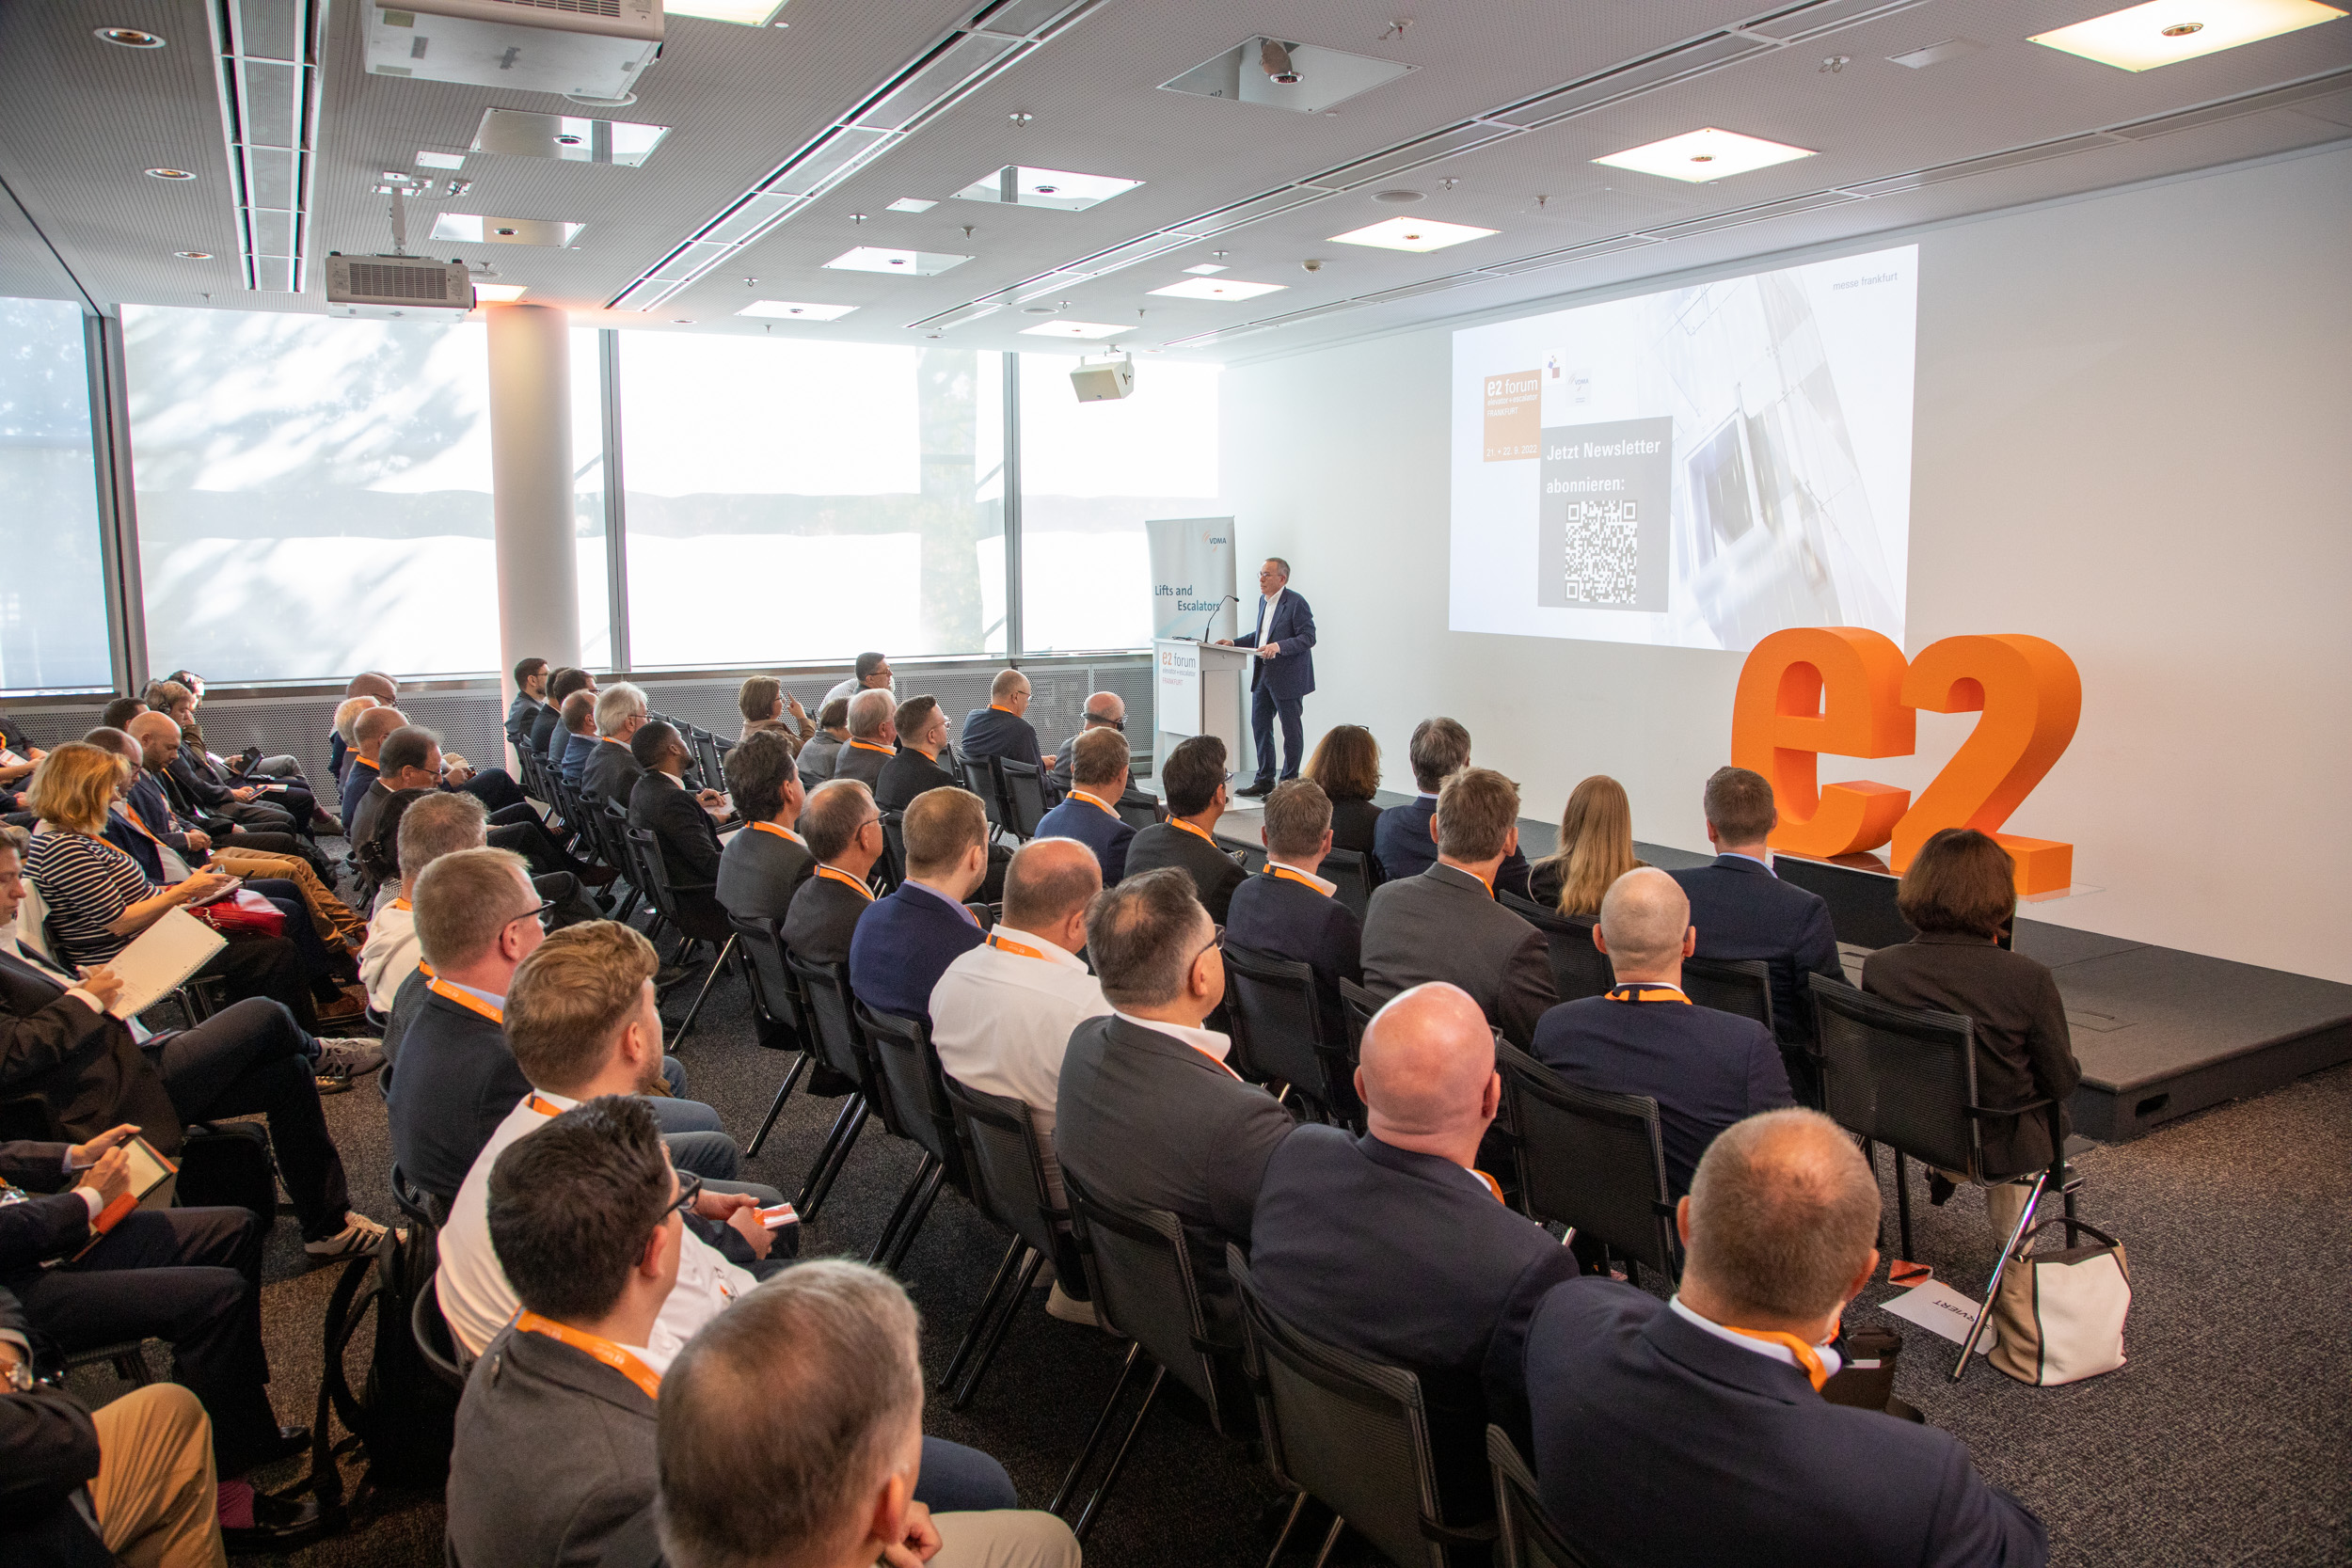 The E2 Forum Frankfurt 2022: forum of innovations, impulses and contacts for experts in vertical-horizontal mobility in the building of the future.